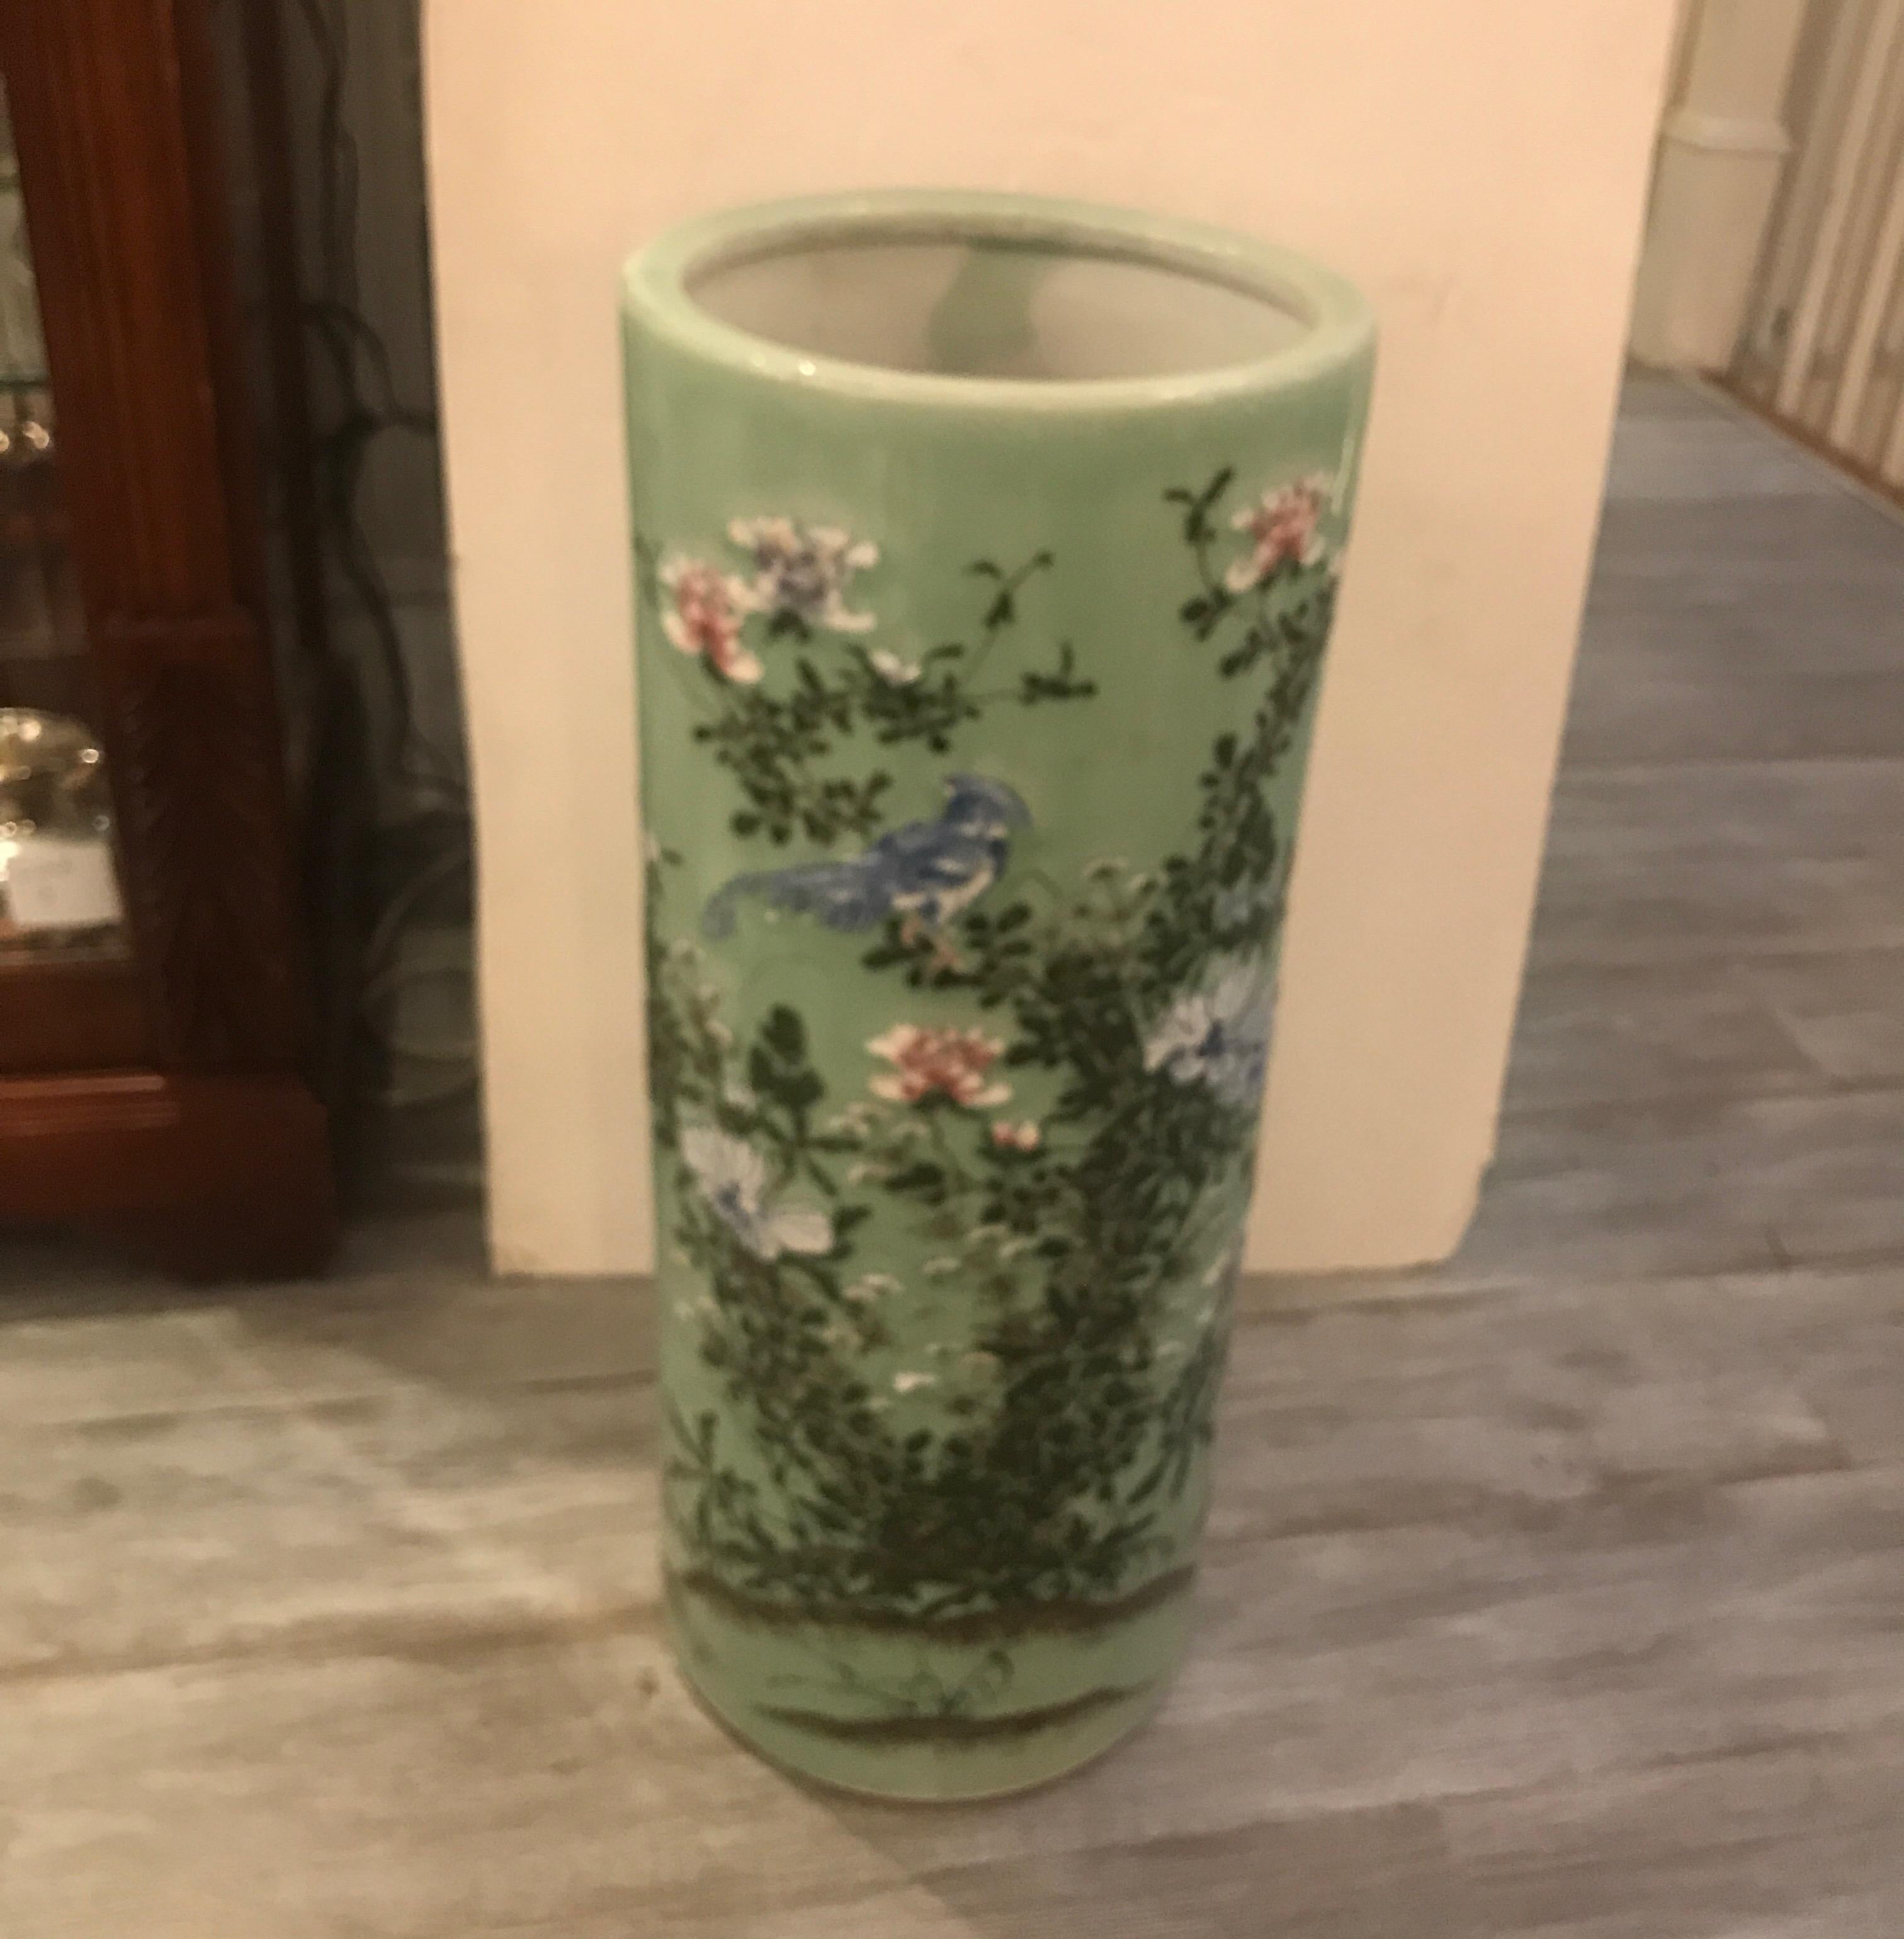 A Japanese porcelain hand painted decoration umbrella floor vase with celedon background. The hand painted porcelain Stand with floral decoration with birds and greenery, late 19th century.